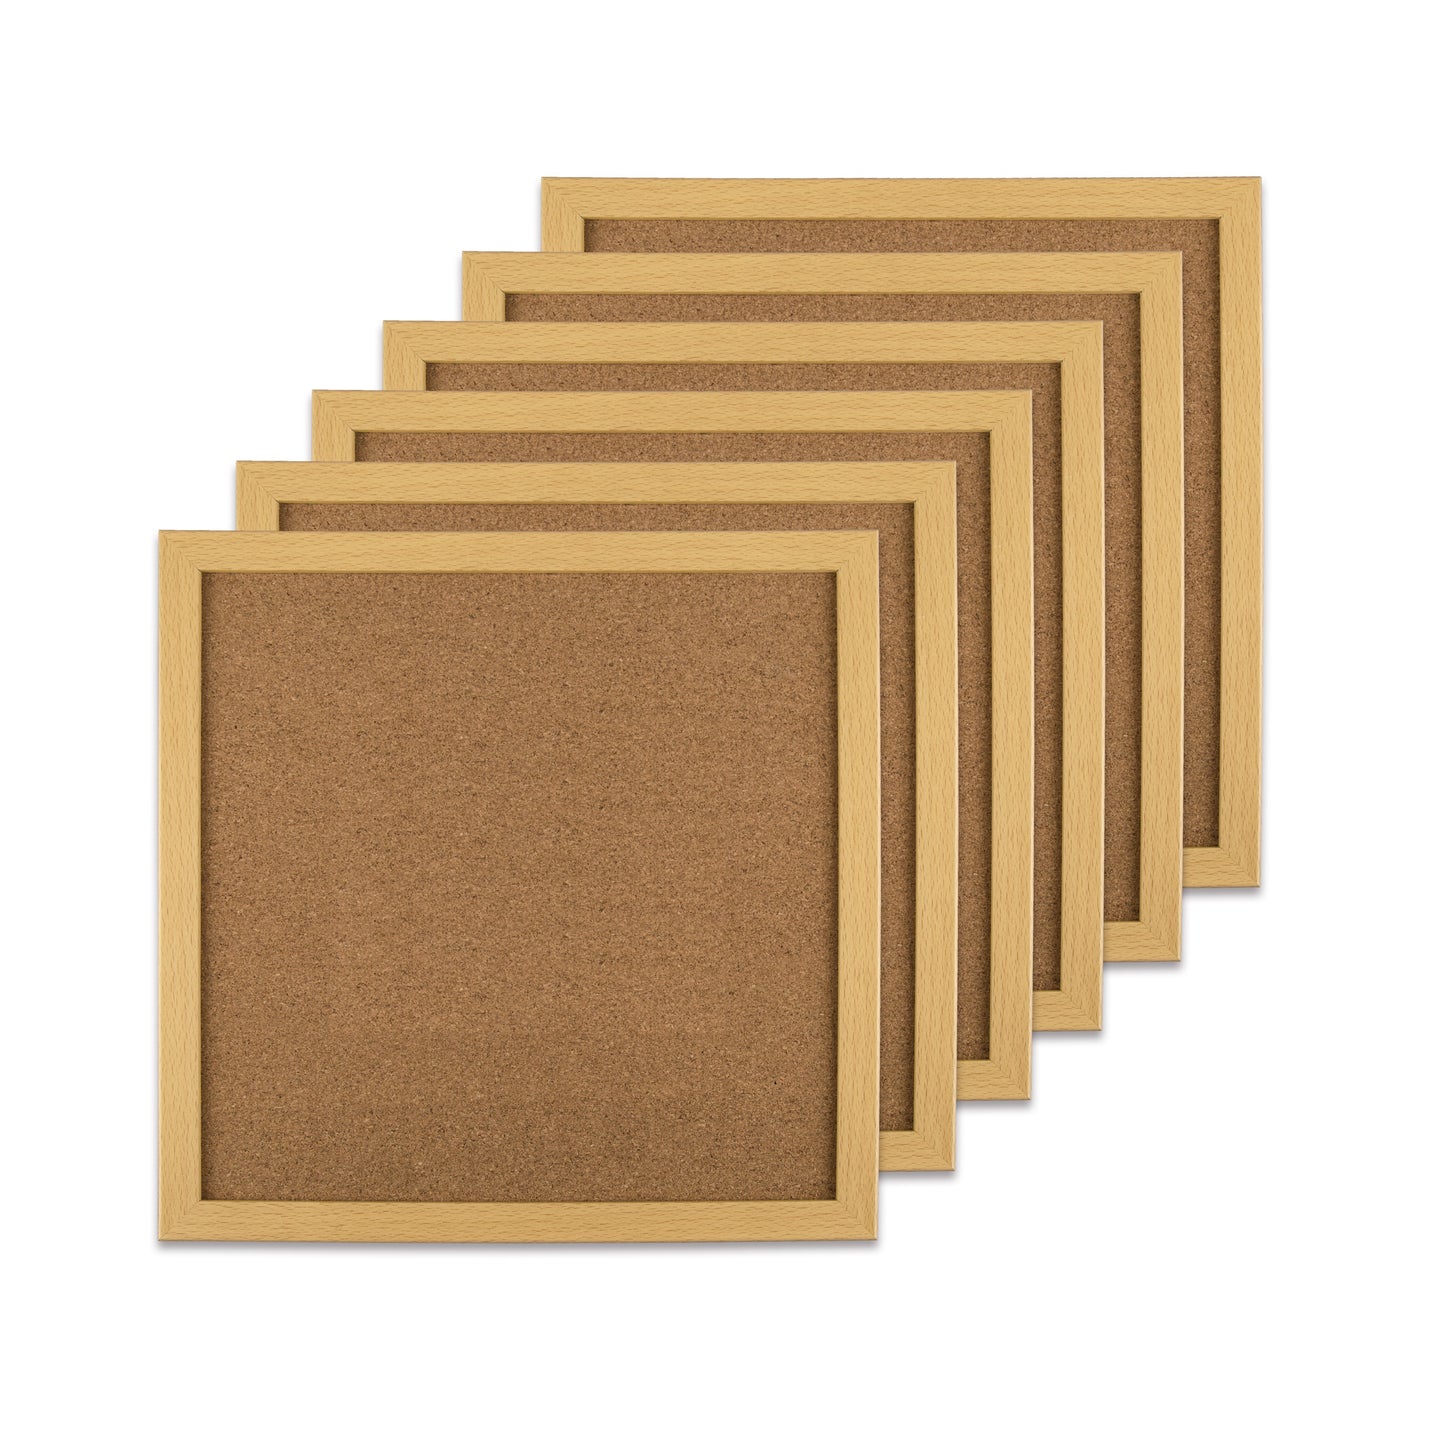 M10 Square Combo Wall Mounted Cork Bulletin Board with Plastic Frame, OEM ODM - Premium cork bulletin board from Madic Whiteboard Factory - Madic Whiteboard Factory